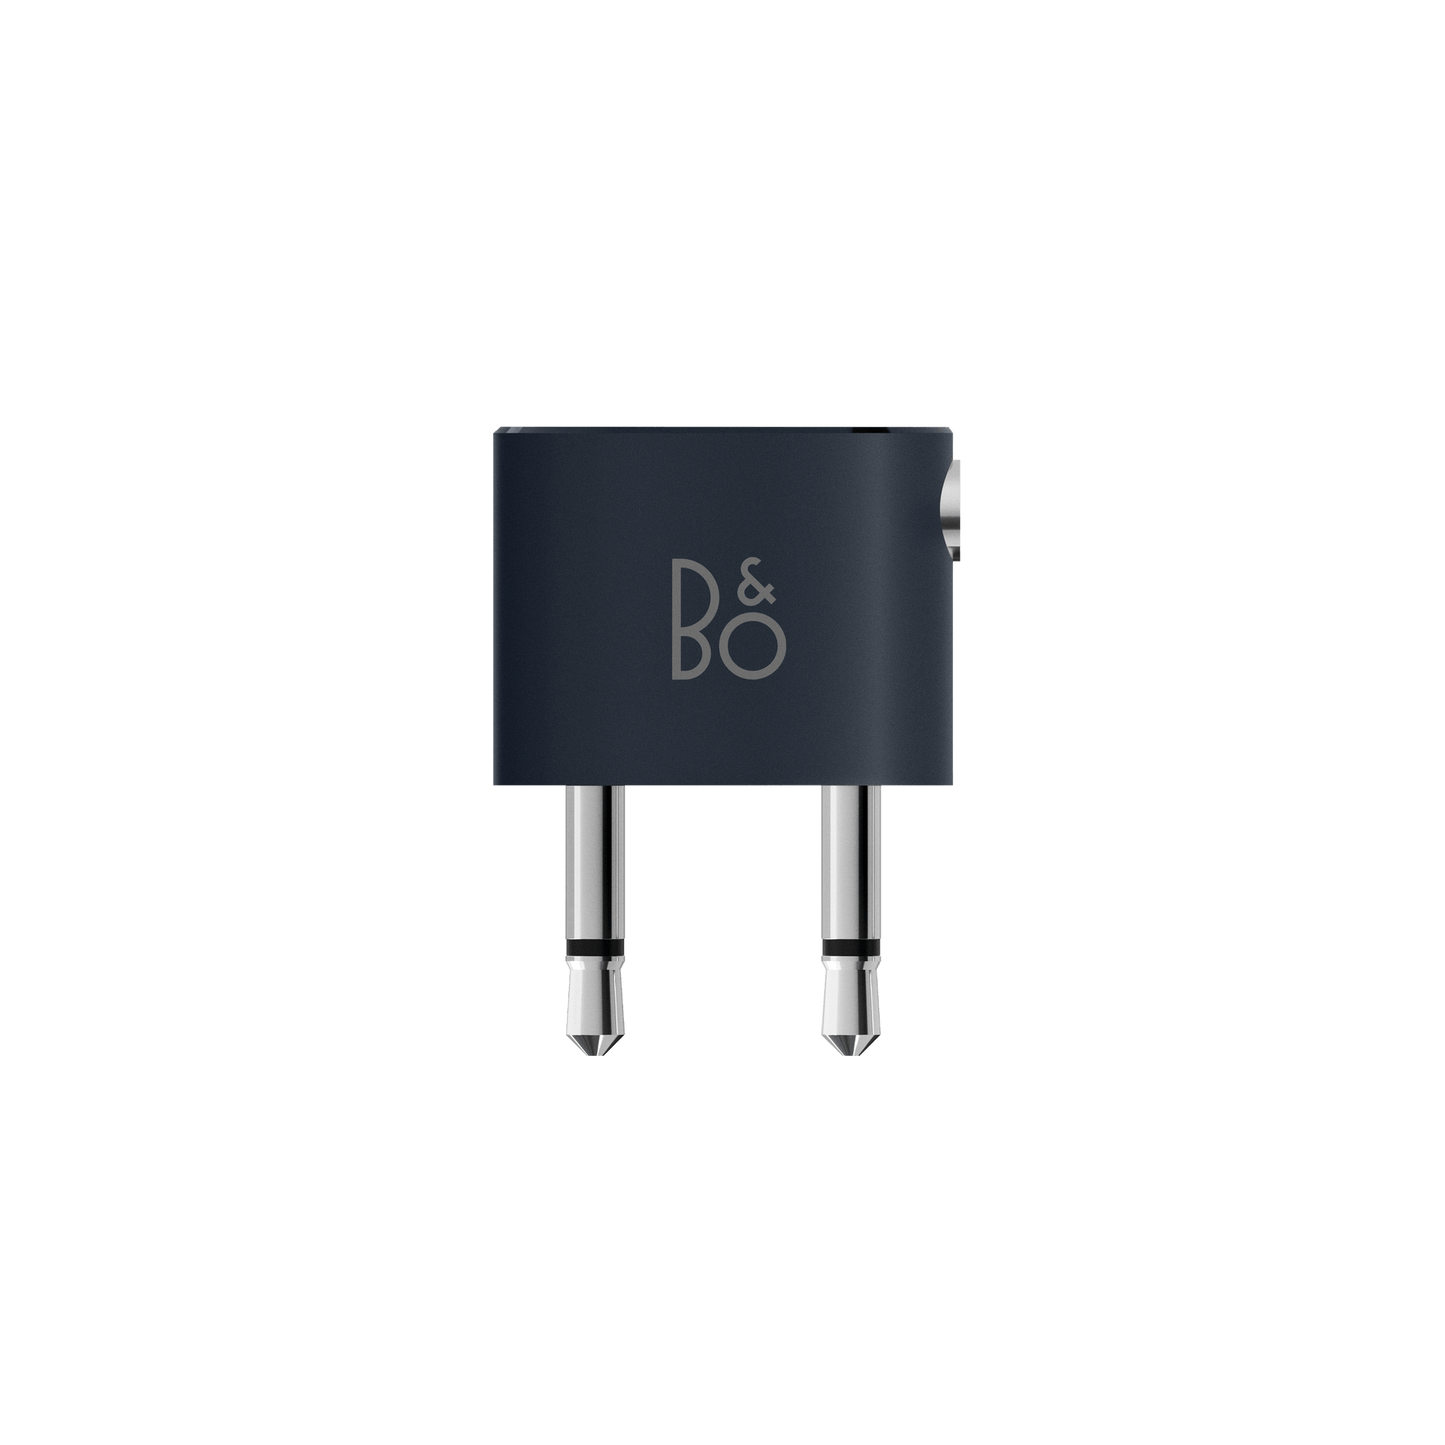 Flight Adaptor for Beoplay H95